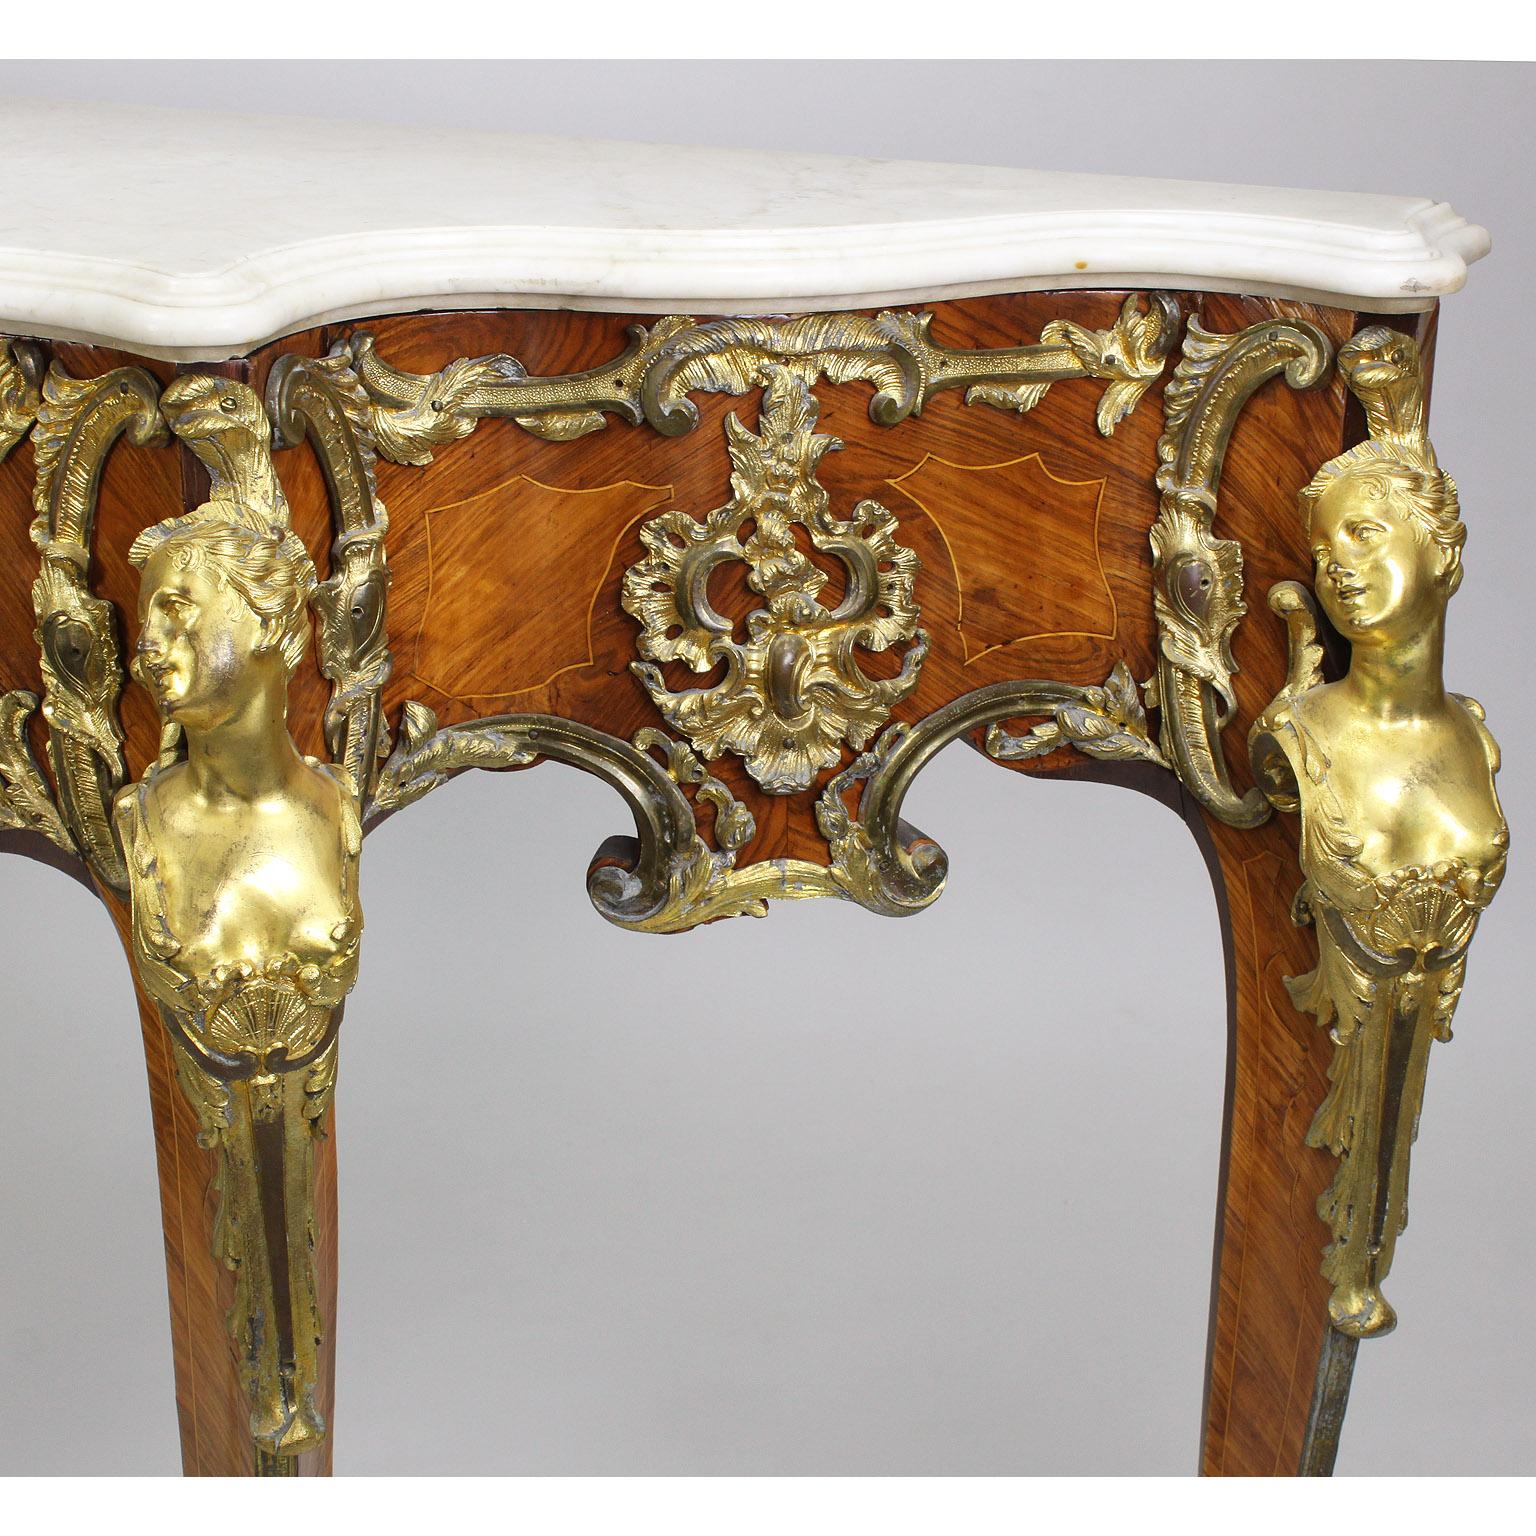 French 19th Century Louis XV Style Ormolu-Mounted Console After Charles Cressent For Sale 2